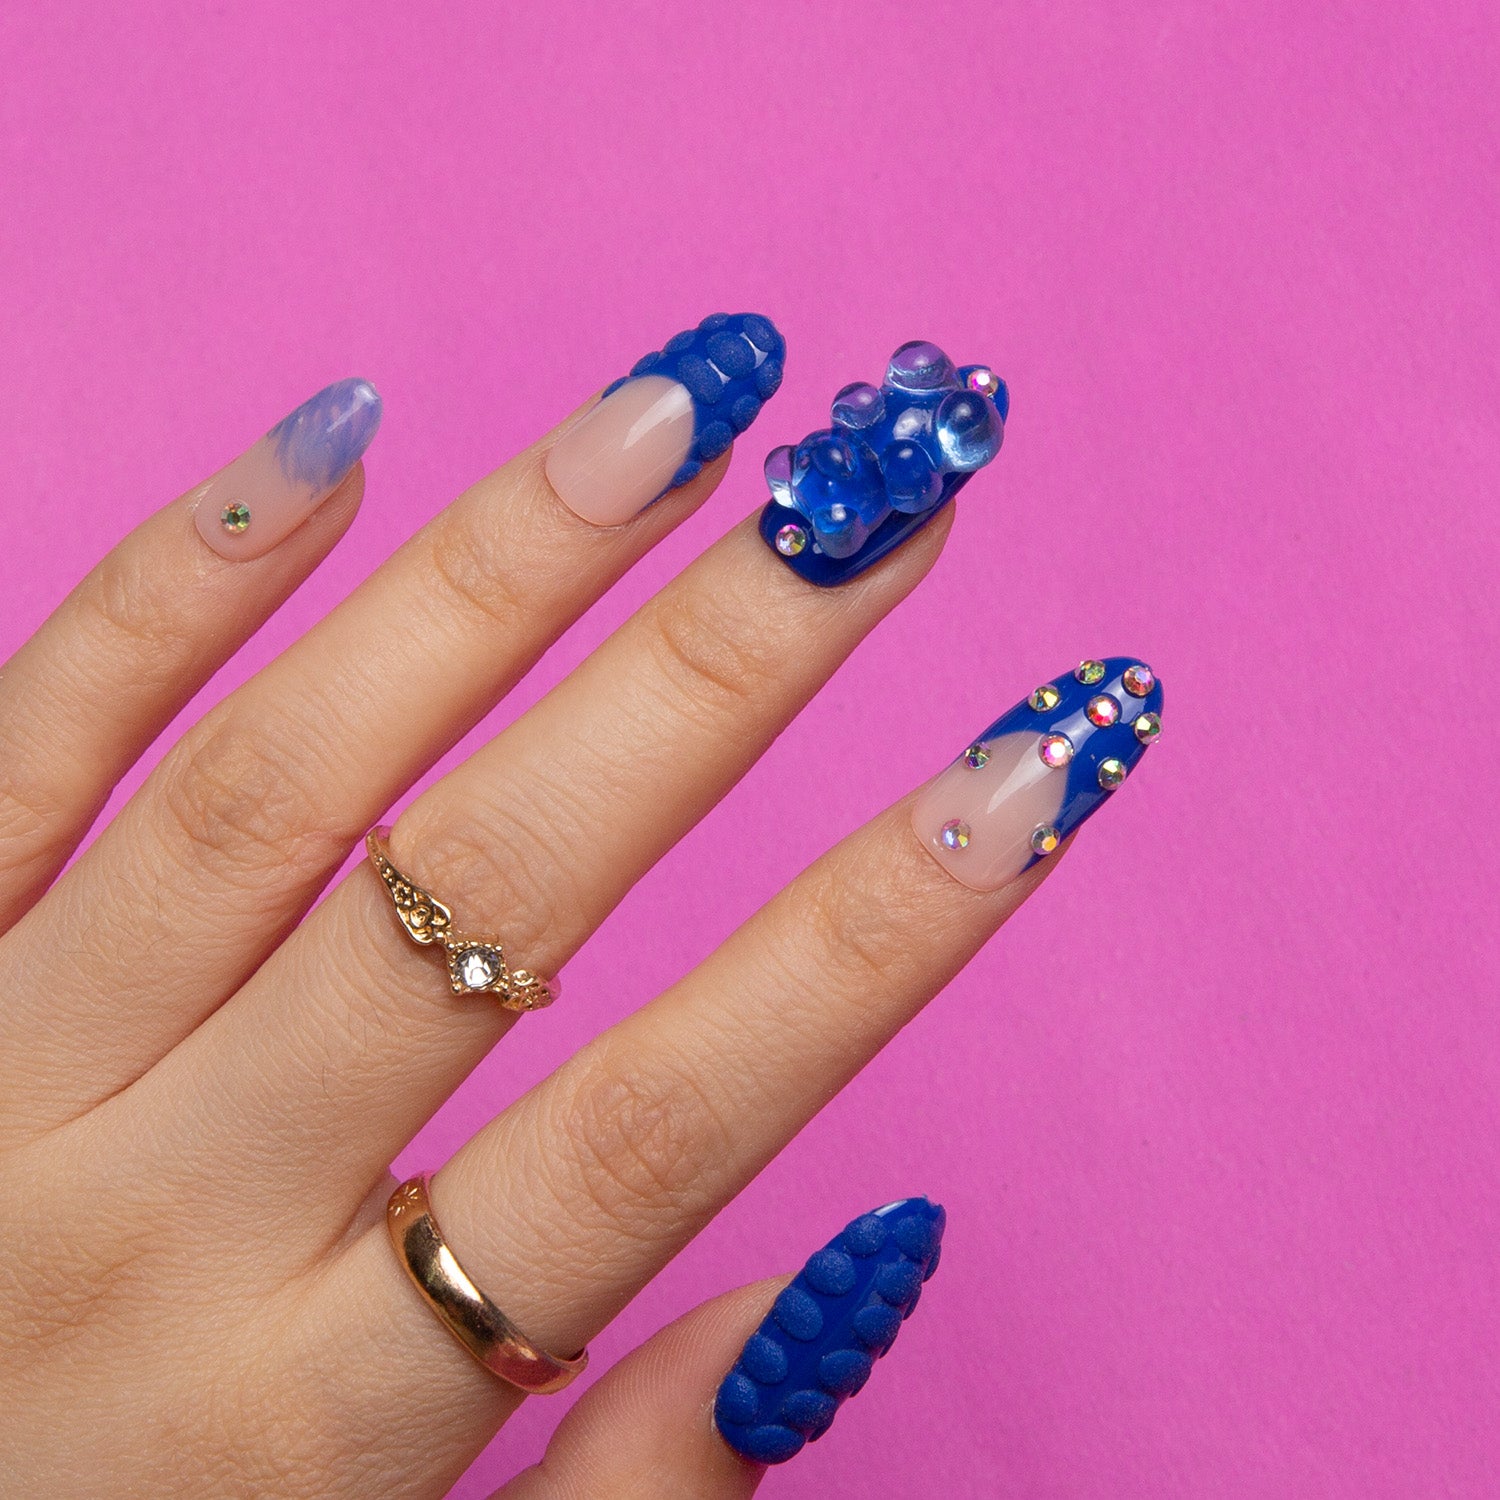 Hand with Little Blue Bear Rhinestone French tip nails featuring blue hue, gummy bear designs, rhinestones, and 3D dots, against a pink background. Fingers adorned with gold rings.